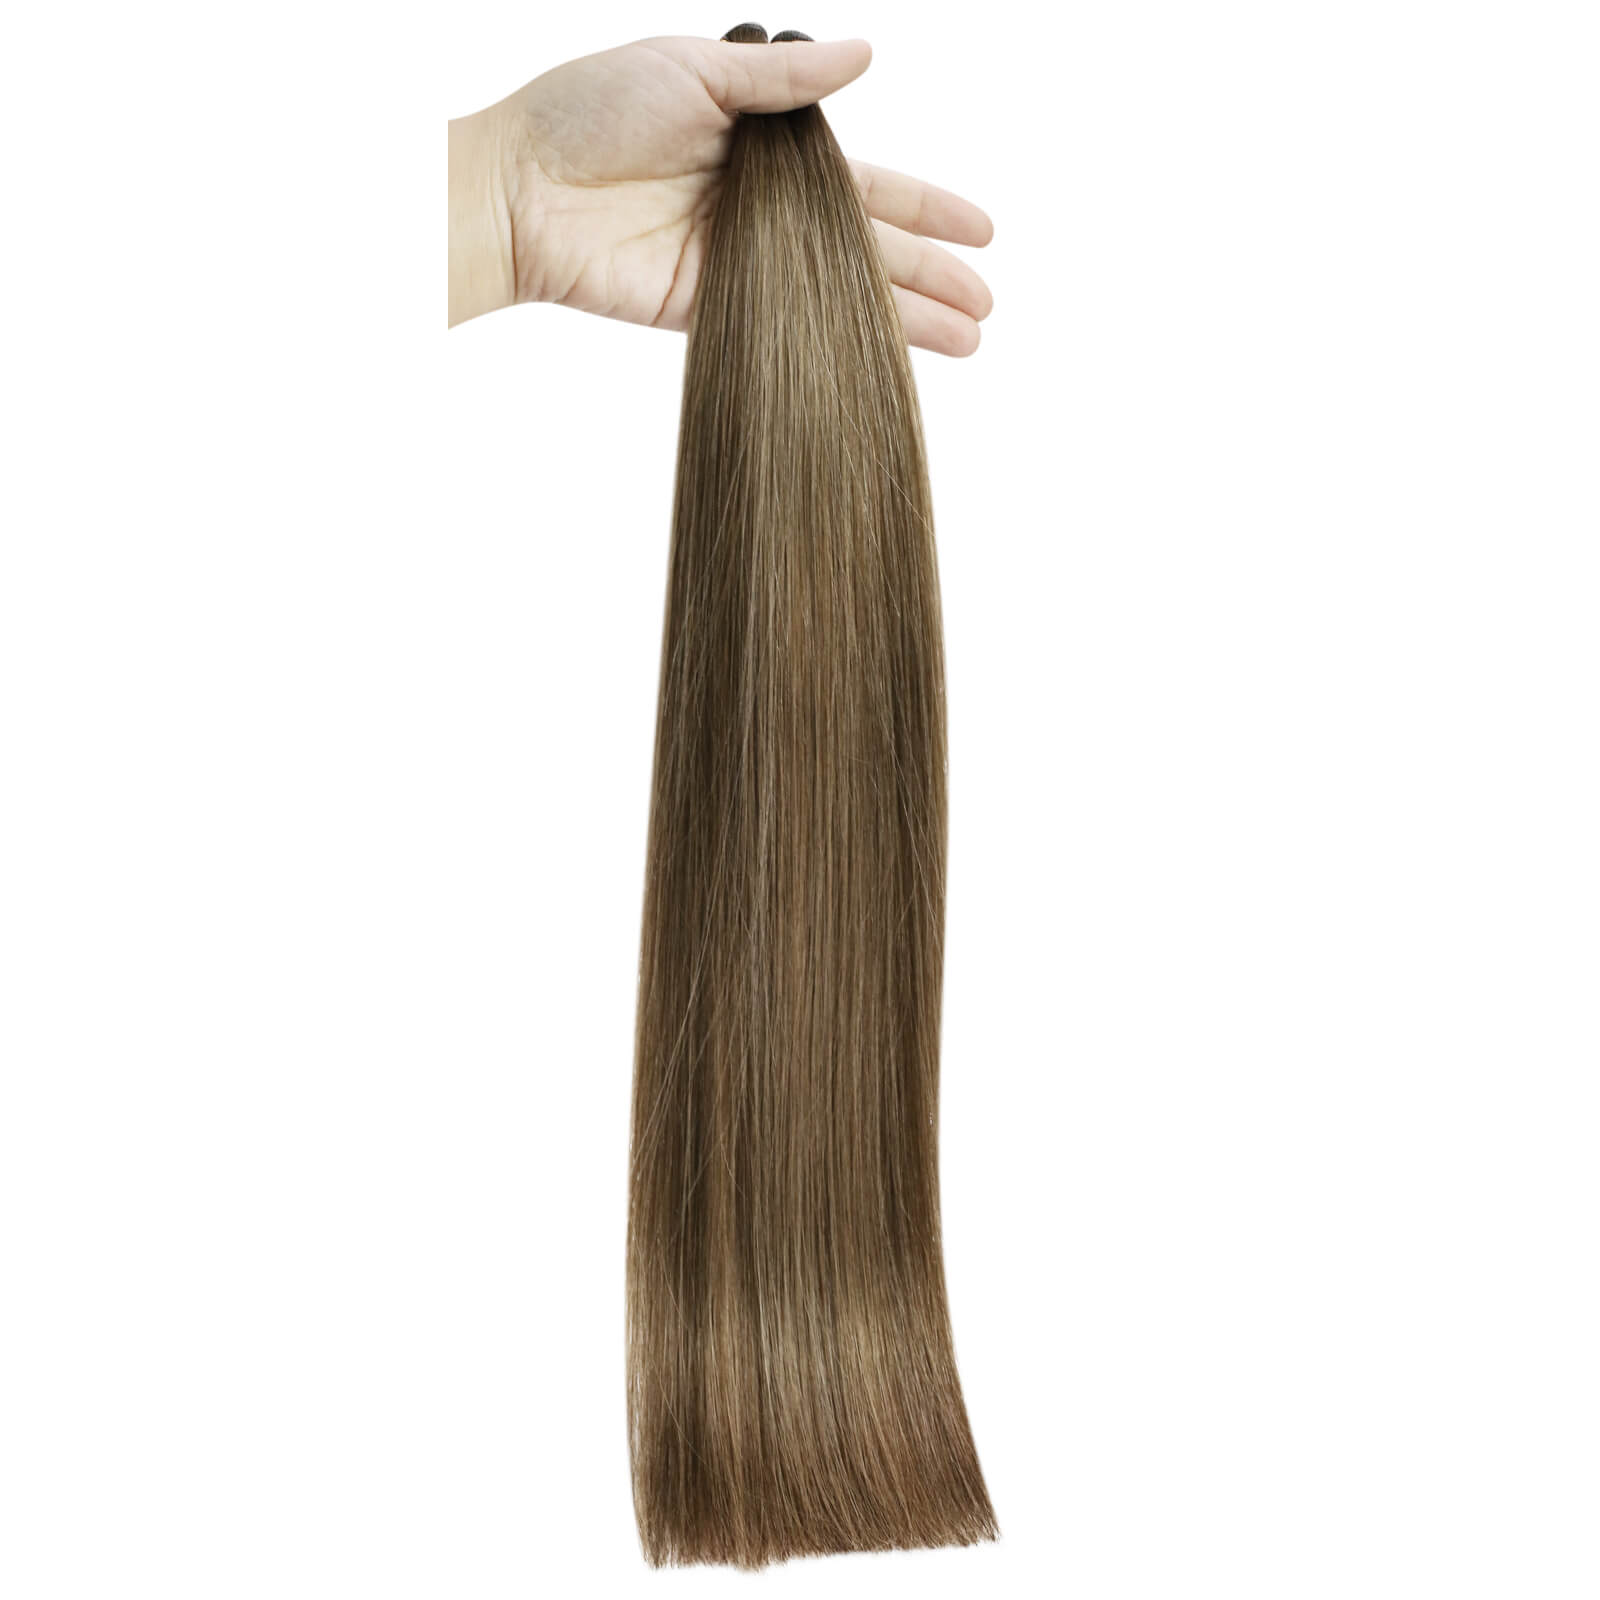 genius weft hair extensions straight balayage brown